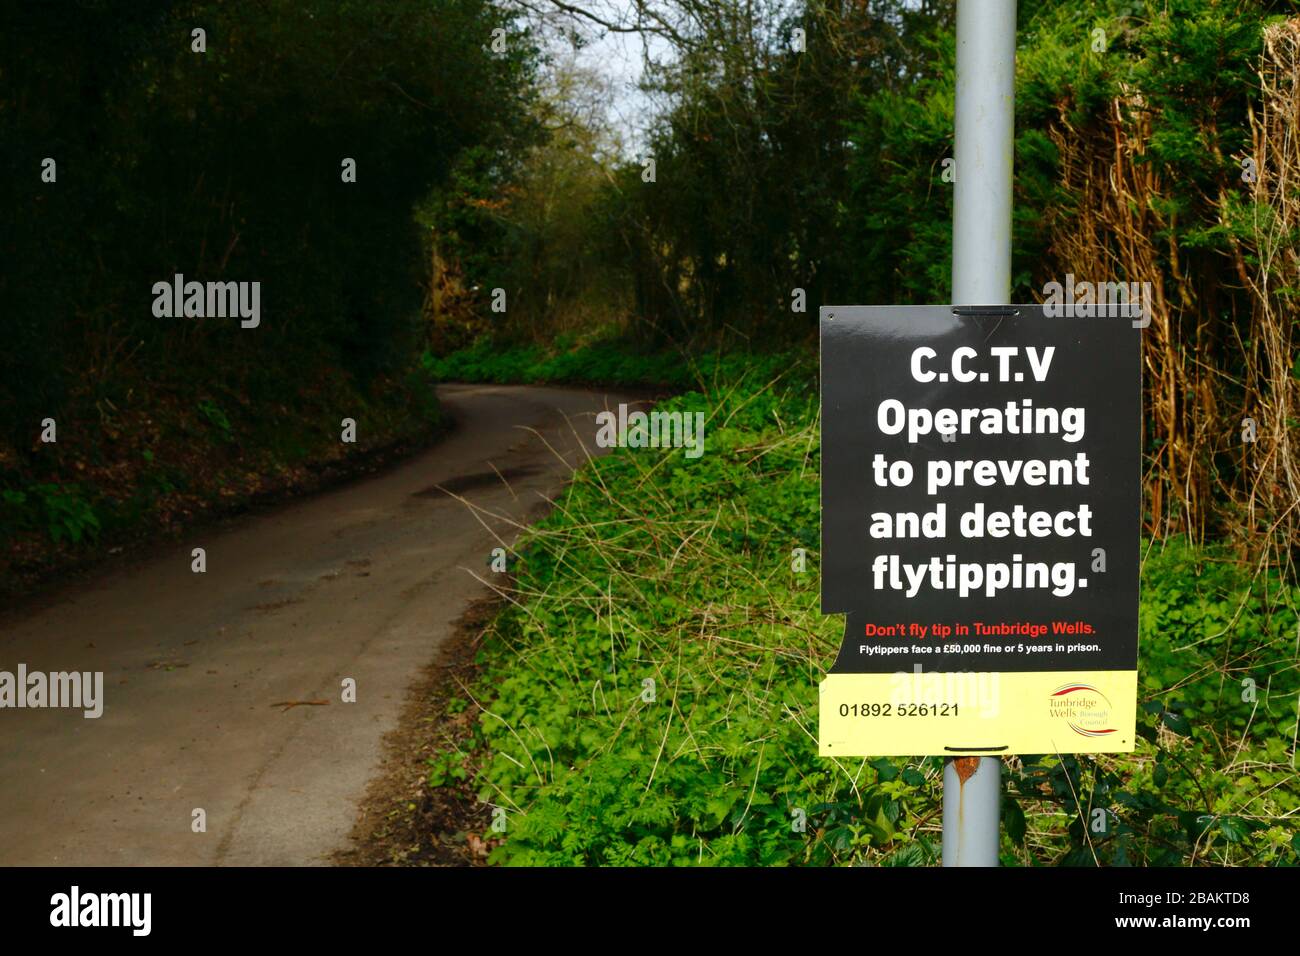 CCTV Operating to Prevent and Detect Flytipping sign on country lane in Weald of Kent near Tunbridge Wells, England Stock Photo